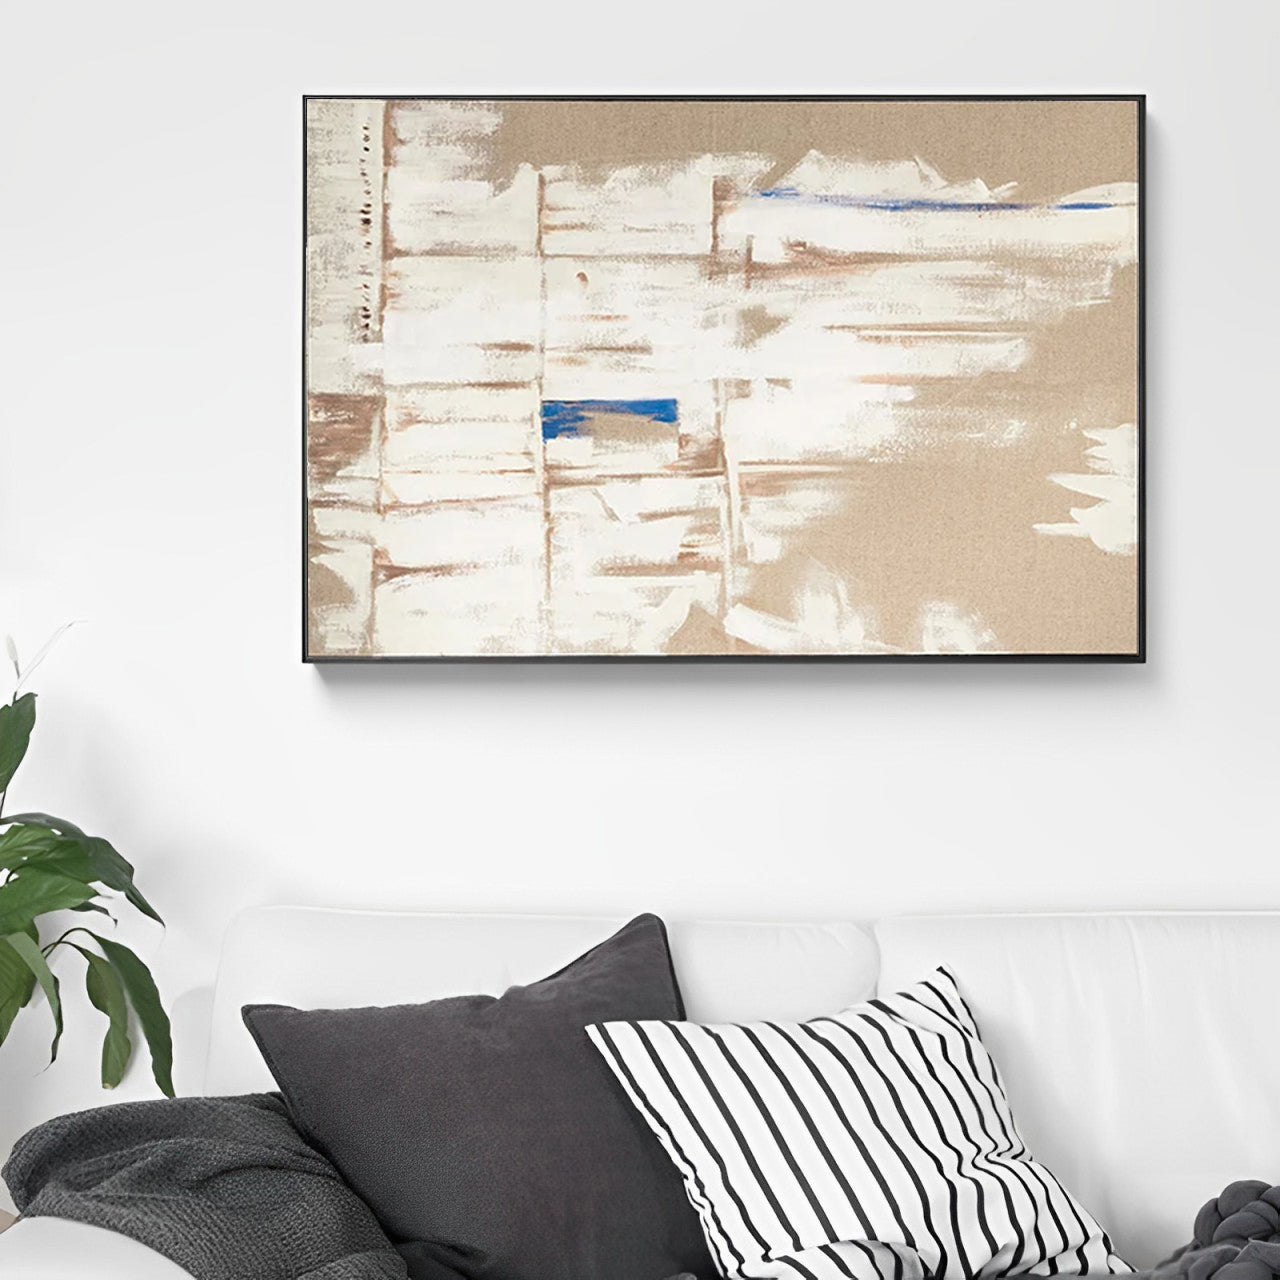 Sepia - Large Abstract Brown and White Art Painting on Canvas